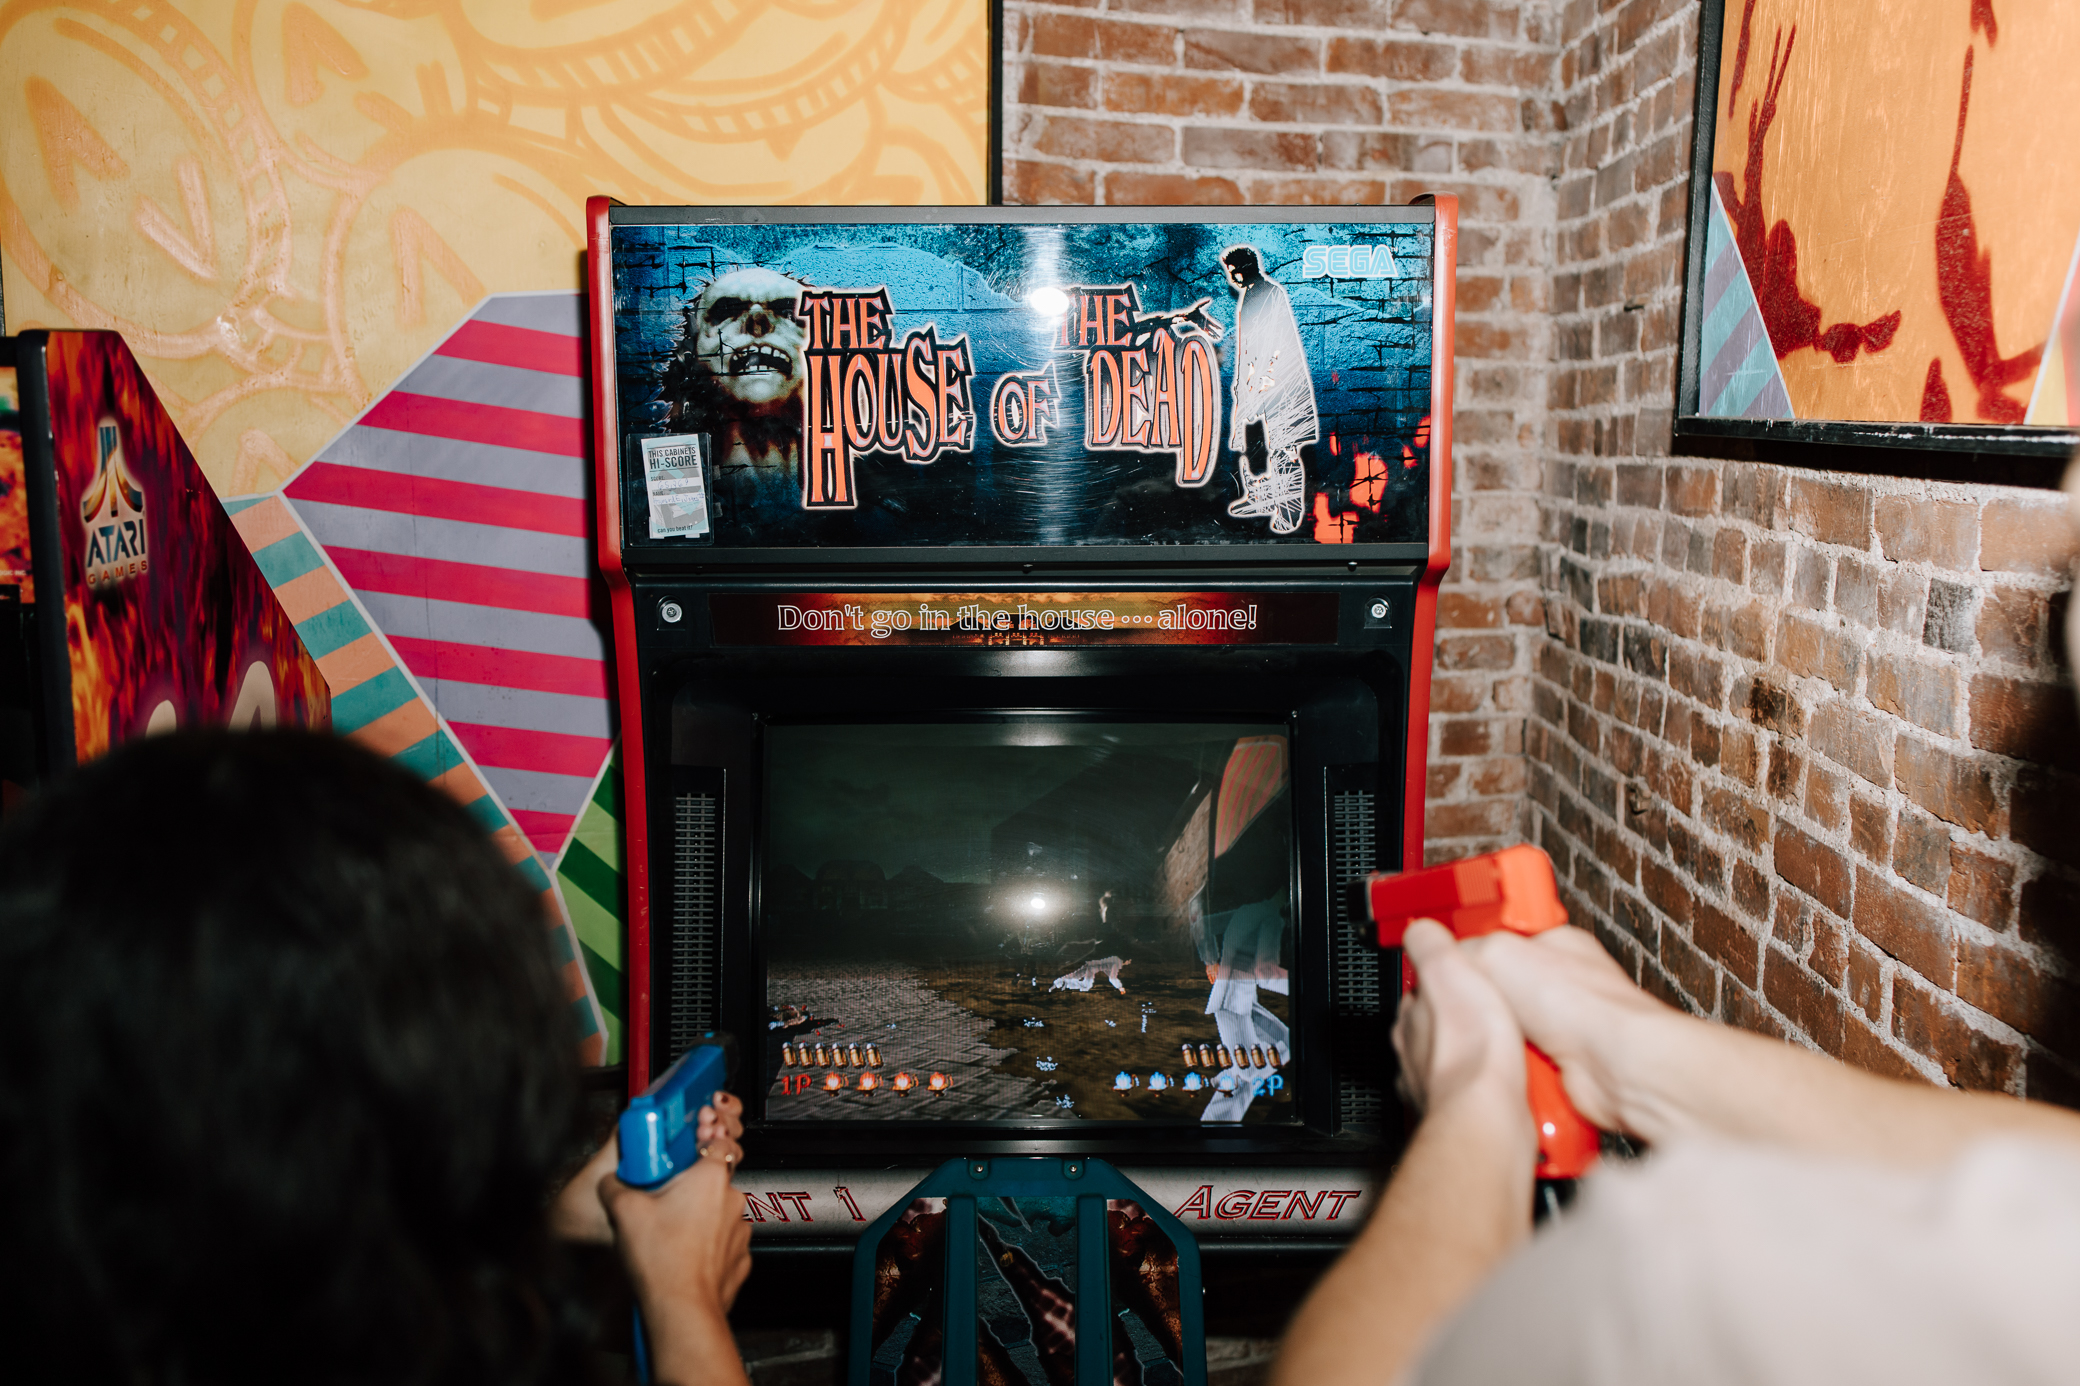 The House of the Dead arcade game being played by an engaged couple at Up-Down Arcade in St. Louis.